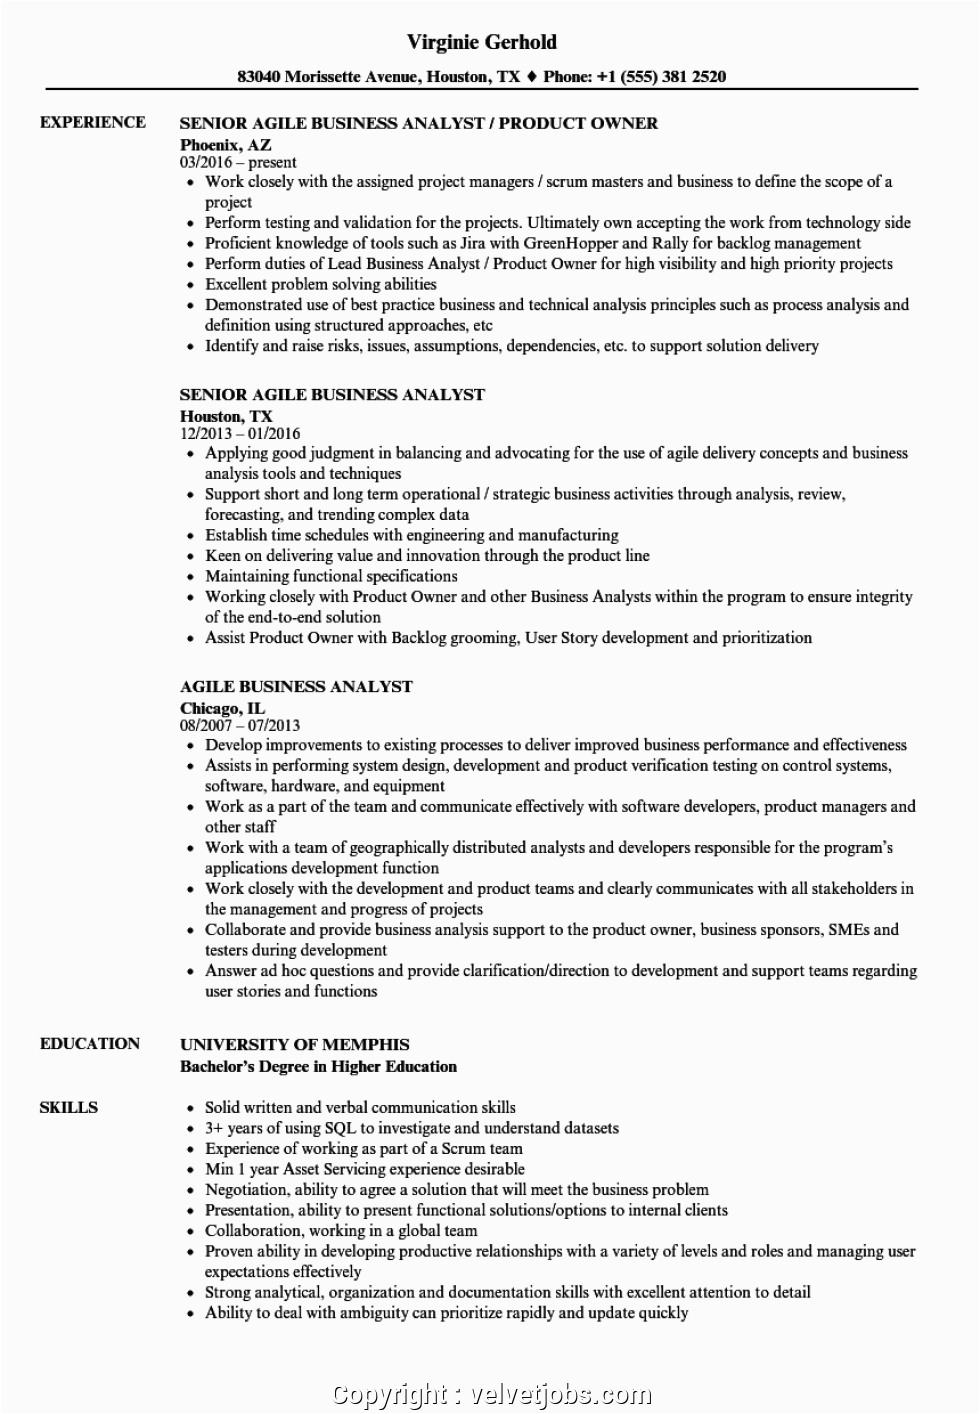 Sample Resume with Agile Experience for Testing Make Sample Resume with Agile Experience Agile Business